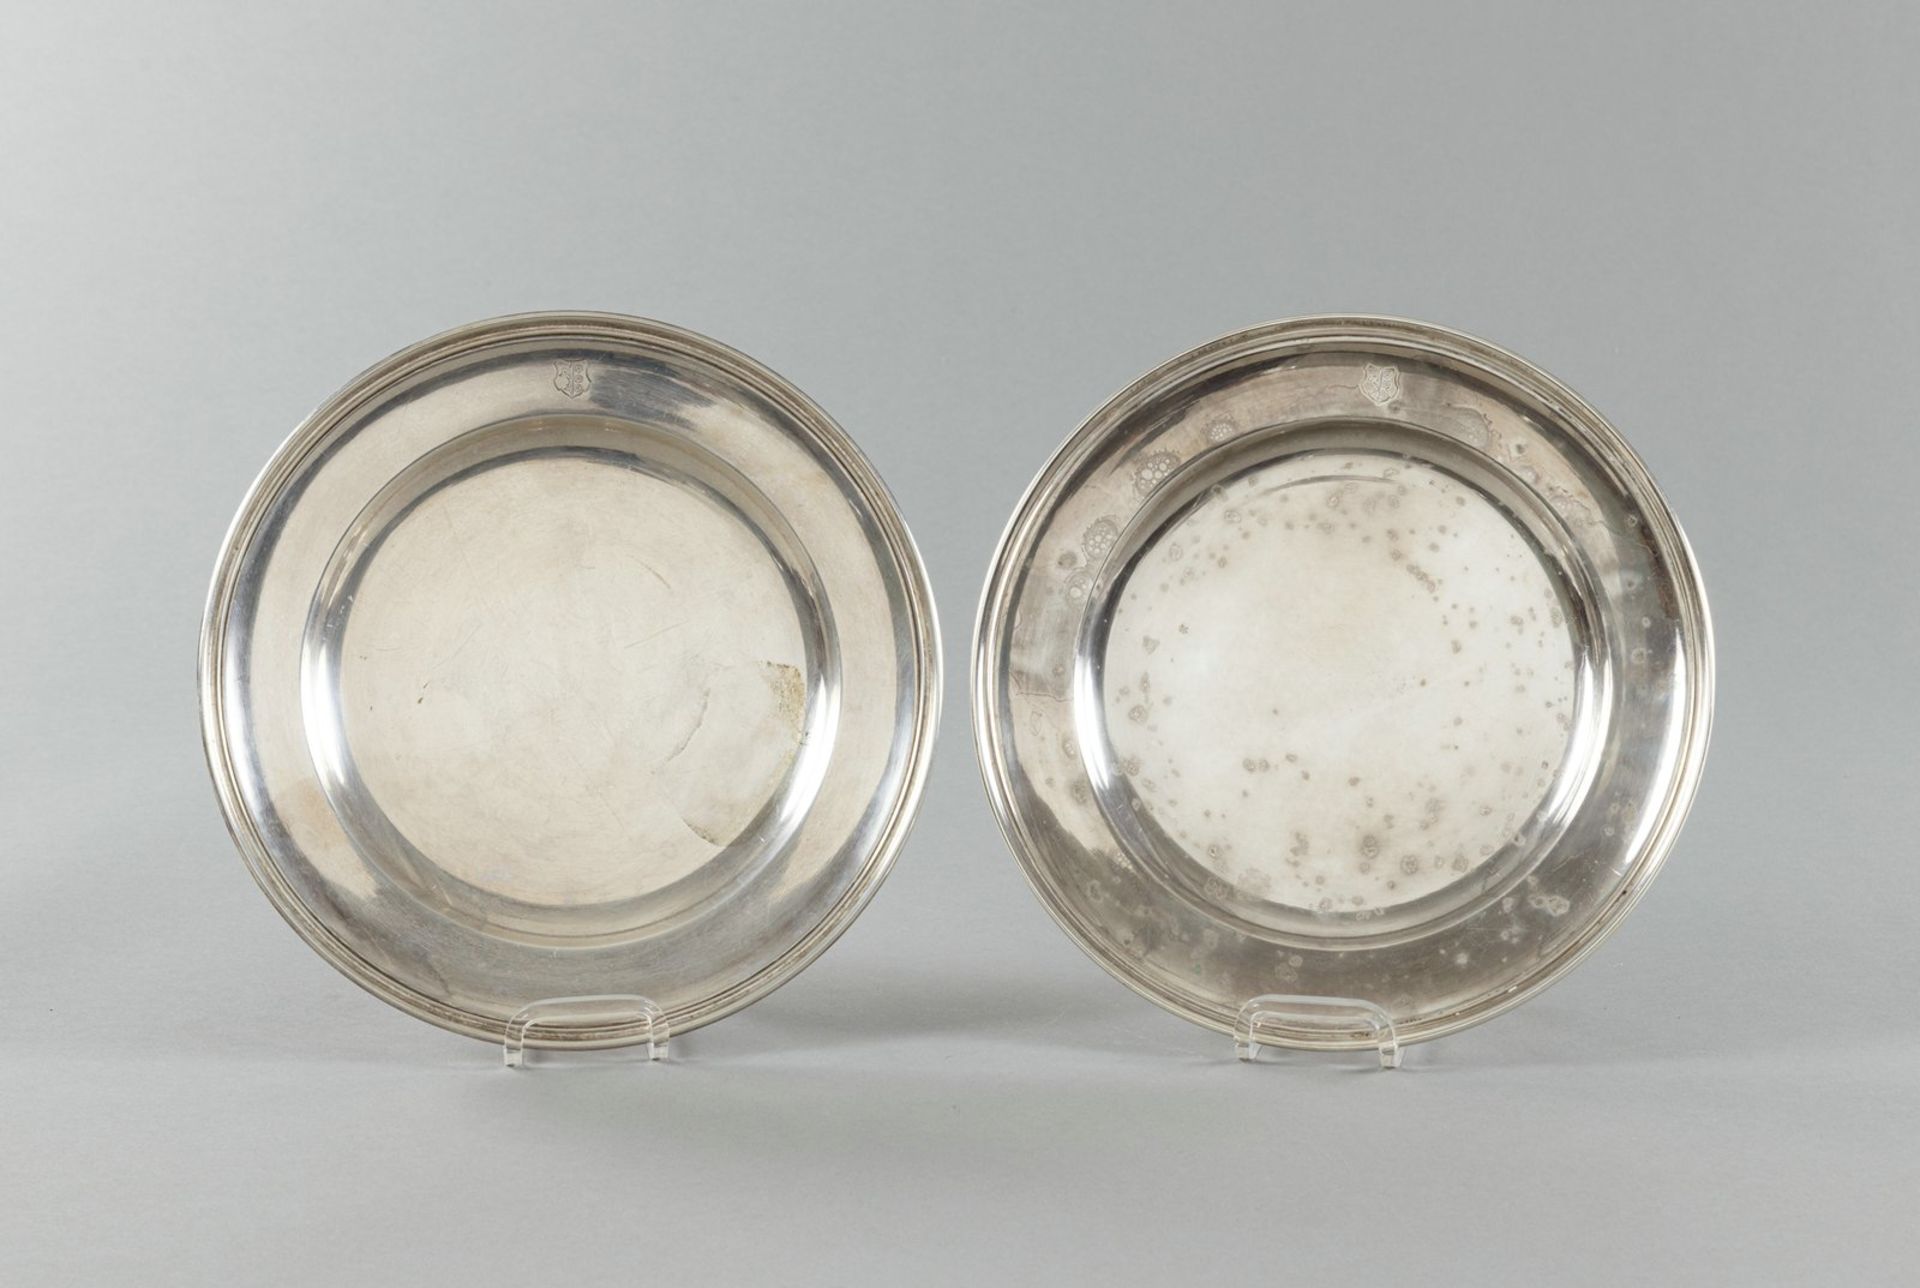 TWO GERMAN SILVER PLATES WITH ENGRAVED COAT OF ARMS - Image 5 of 6